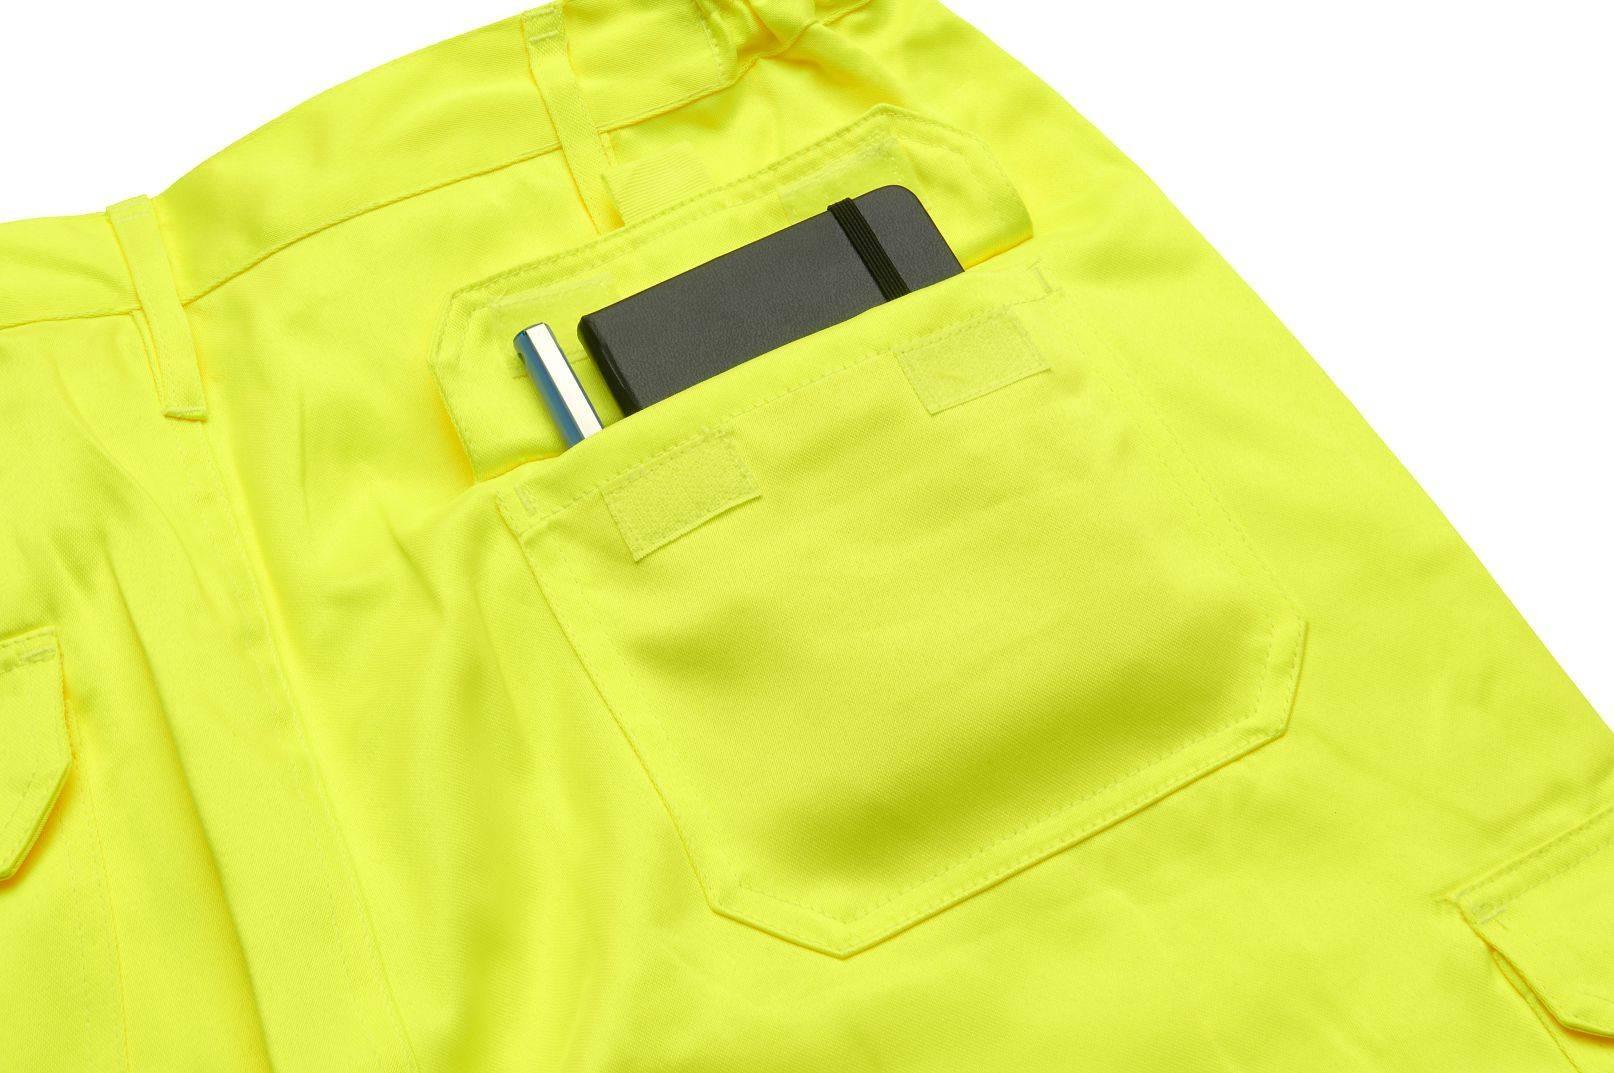 Warrior Hi-Vis yellow comfortable polycotton work trousers #0118DWHV04SY